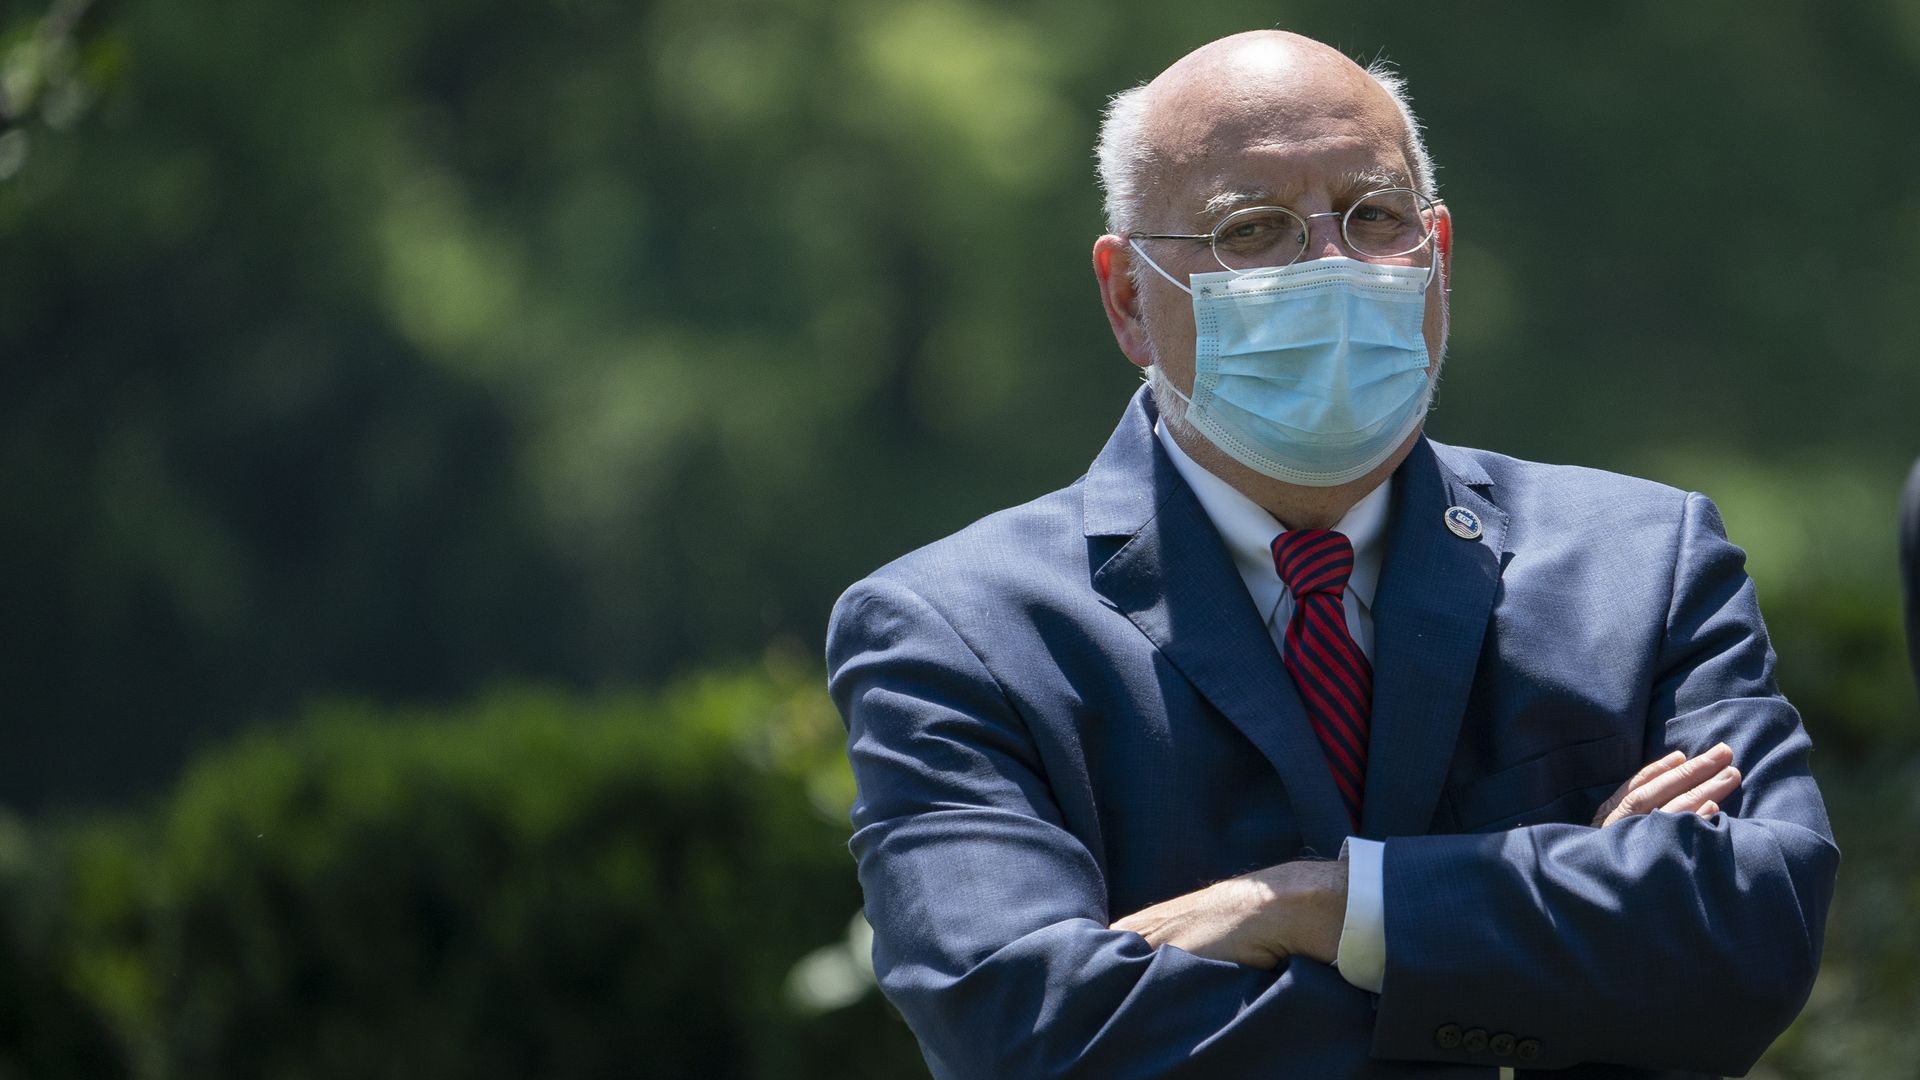 In this image, CDC Director Robert Redfield wears a face mask